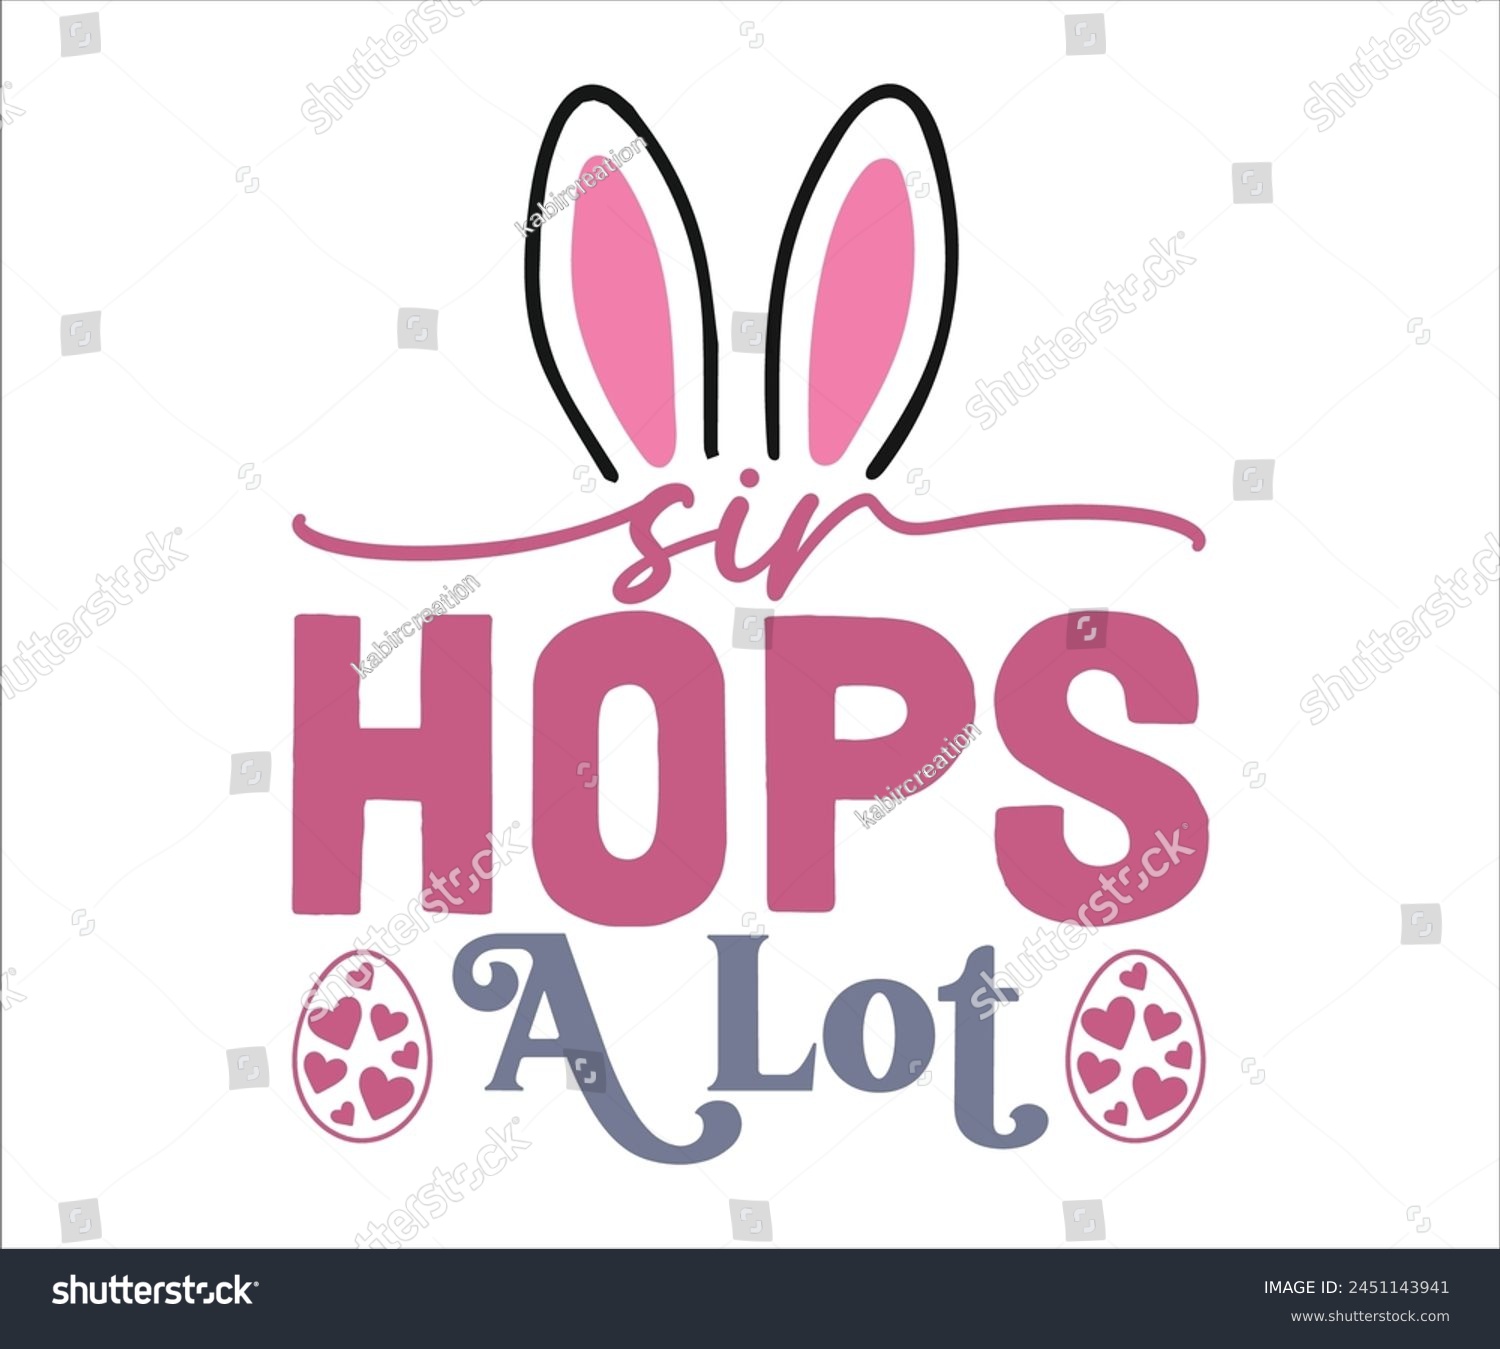 SVG of Sir Hops A Lot T-shirt, Happy easter T-shirt, Easter shirt, spring holiday, Easter Cut File,  Bunny and spring T-shirt, Egg for Kids, Egg for Kids, Easter Funny Quotes, Cut File Cricut svg